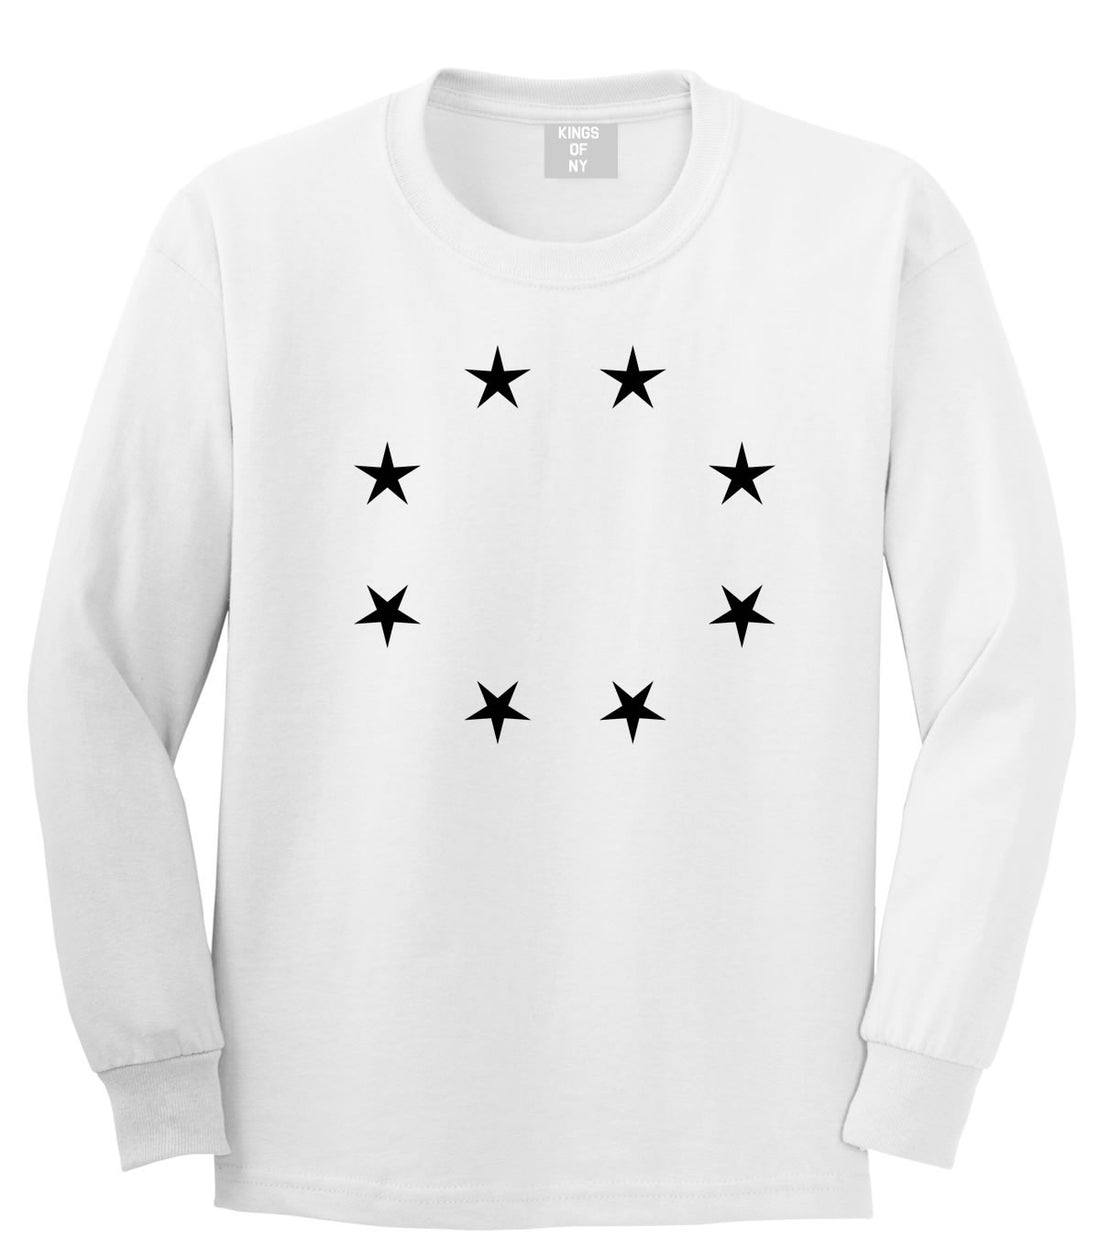 Stars Circle Scale Black by Kings Of NY True Goth Ghetto Long Sleeve Boys Kids T-Shirt in White by Kings Of NY